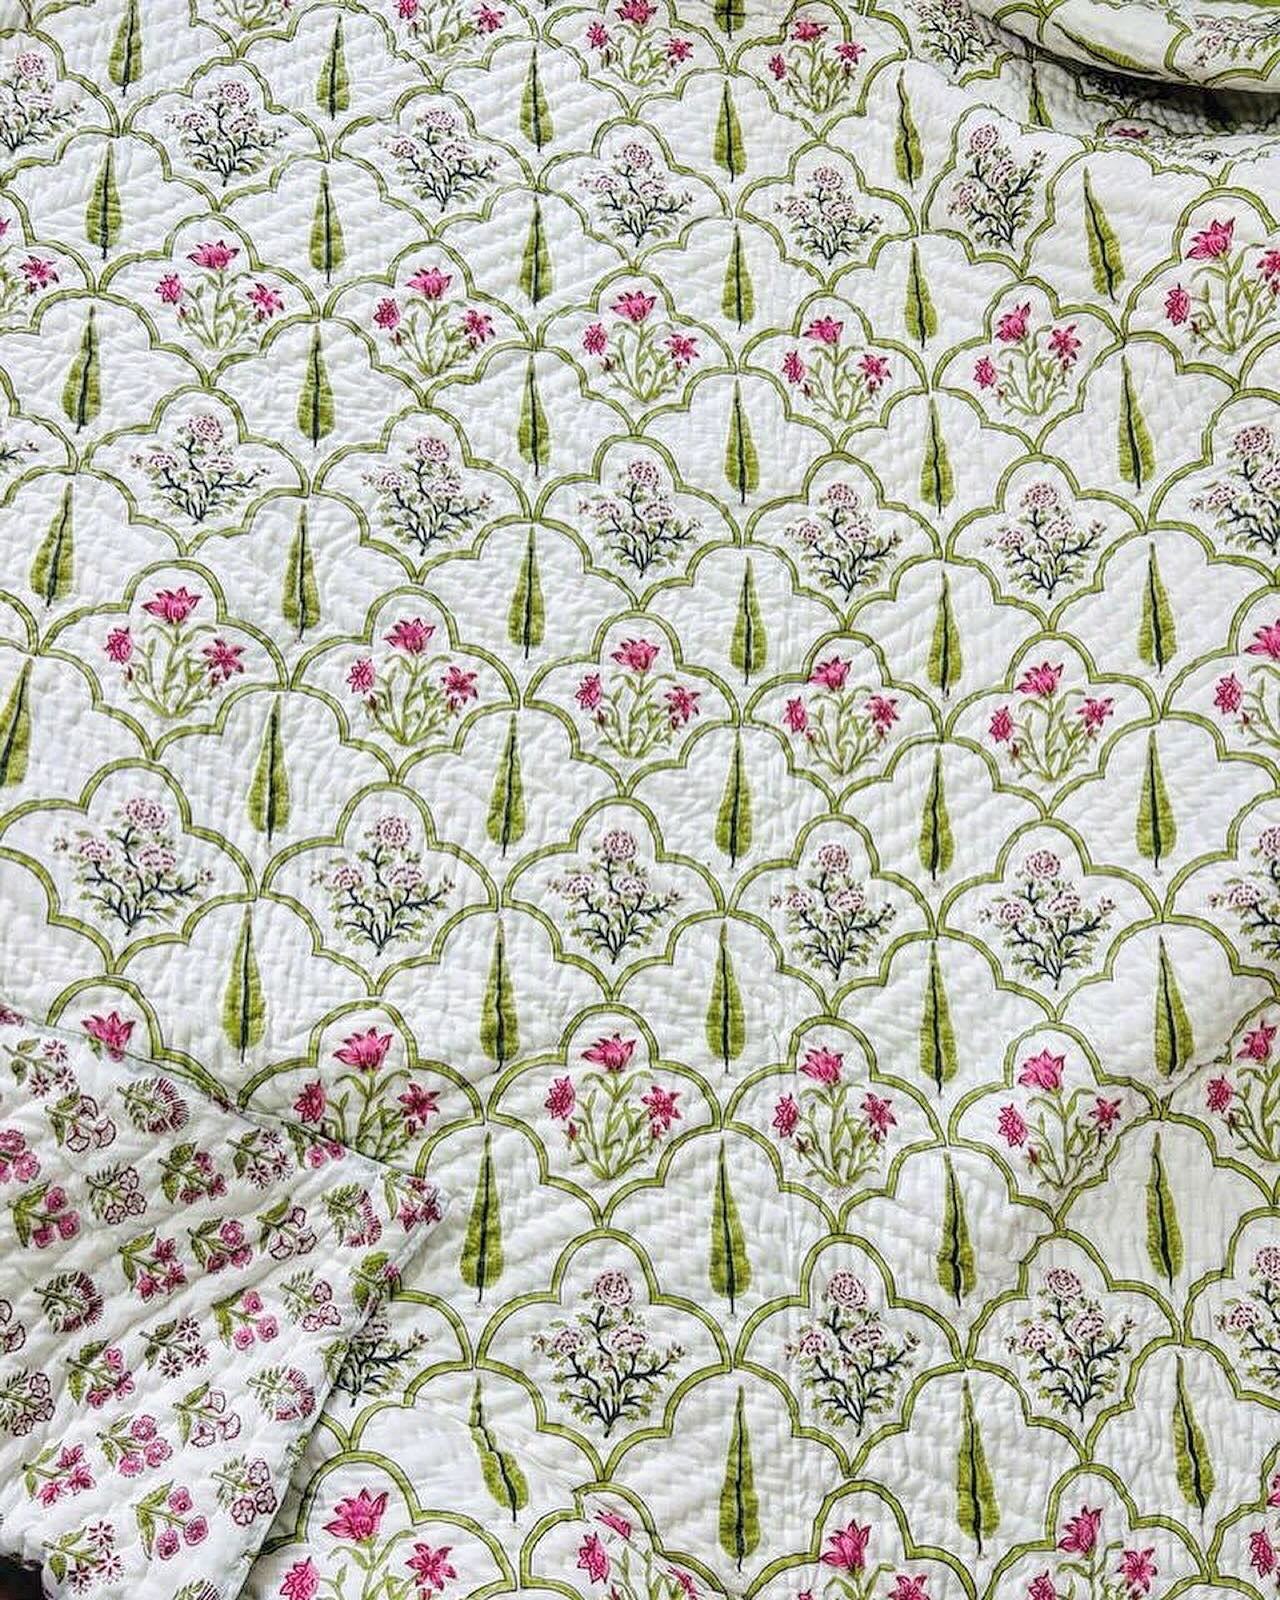 Bloom Summer Light Cotton Muslin Block Printed Quilt - Single Size 60x90 inches